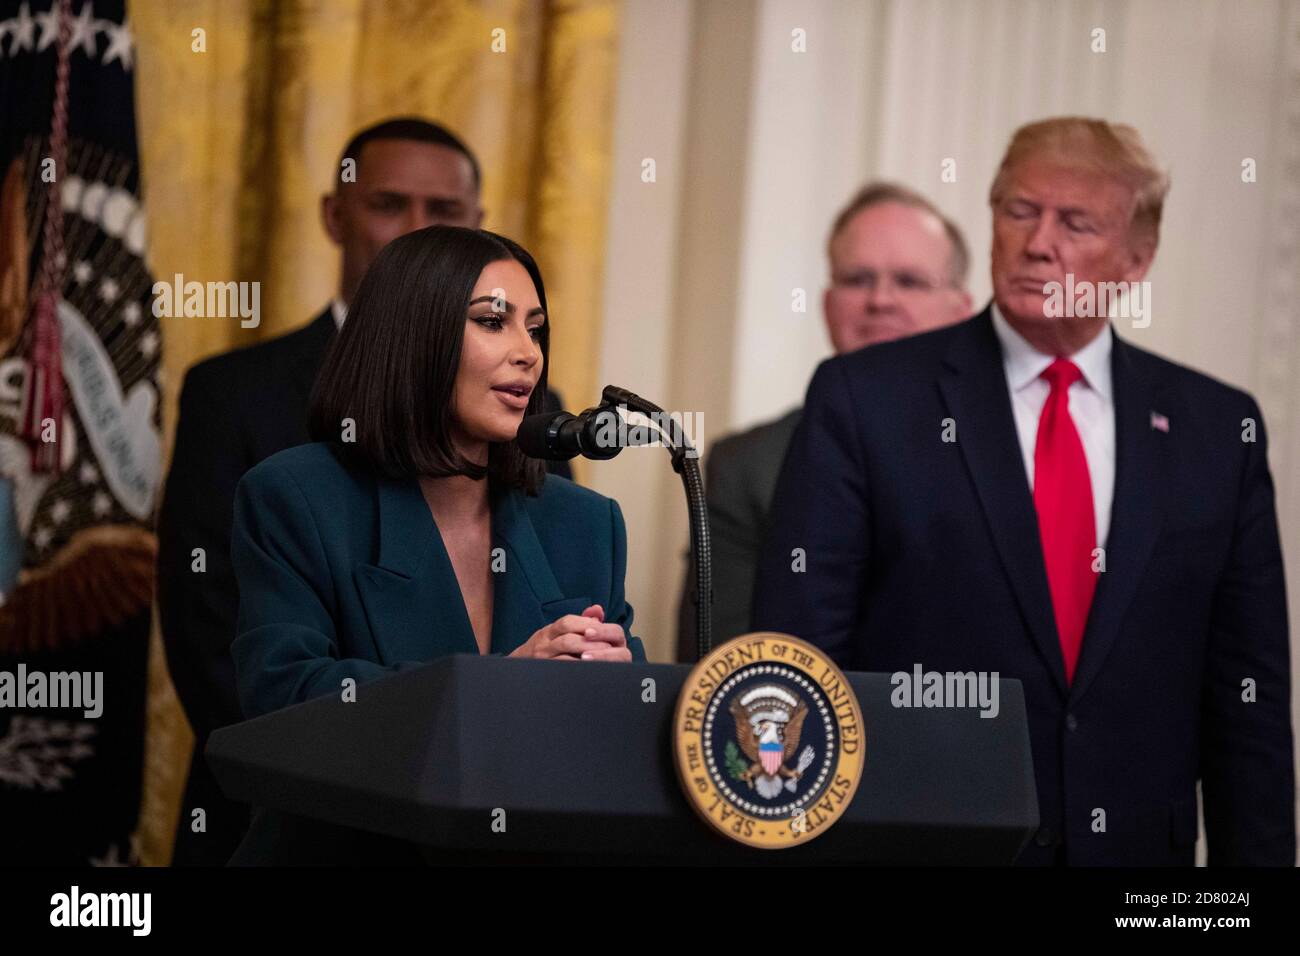 Kim Kardashian West speaks during an event about second chance hiring in the East Room of the White House in Washington, D.C. on June 13, 2019. U.S. President Donald Trump also spoke during the event which focused on providing reformed inmates opportunities to succeed after leaving prison. Credit: Alex Edelman/The Photo Access Stock Photo